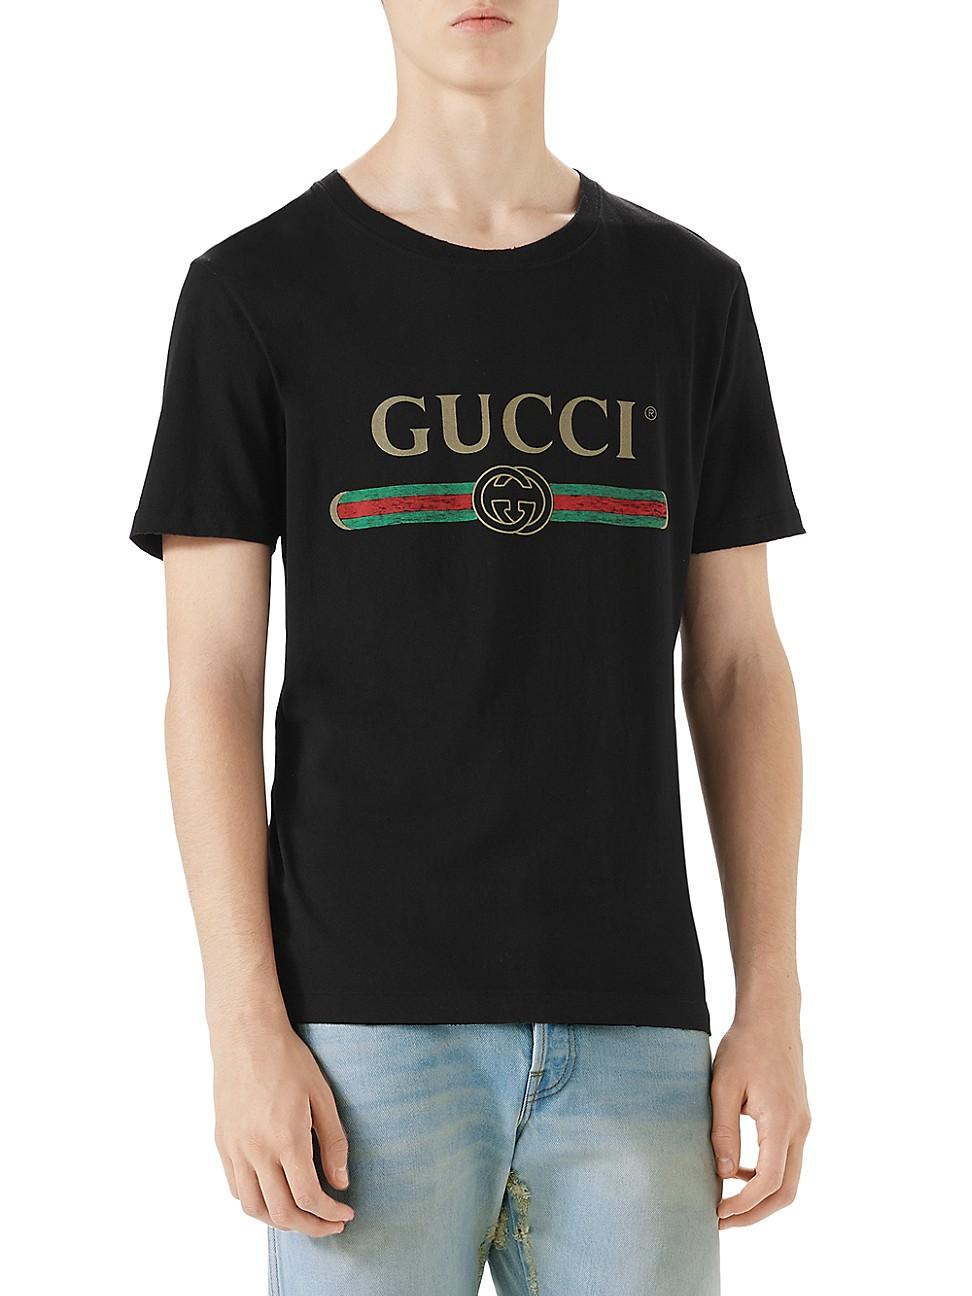 Gucci Cotton Distressed Fake Logo T Shirt in Black for Men - Save 25% - Lyst